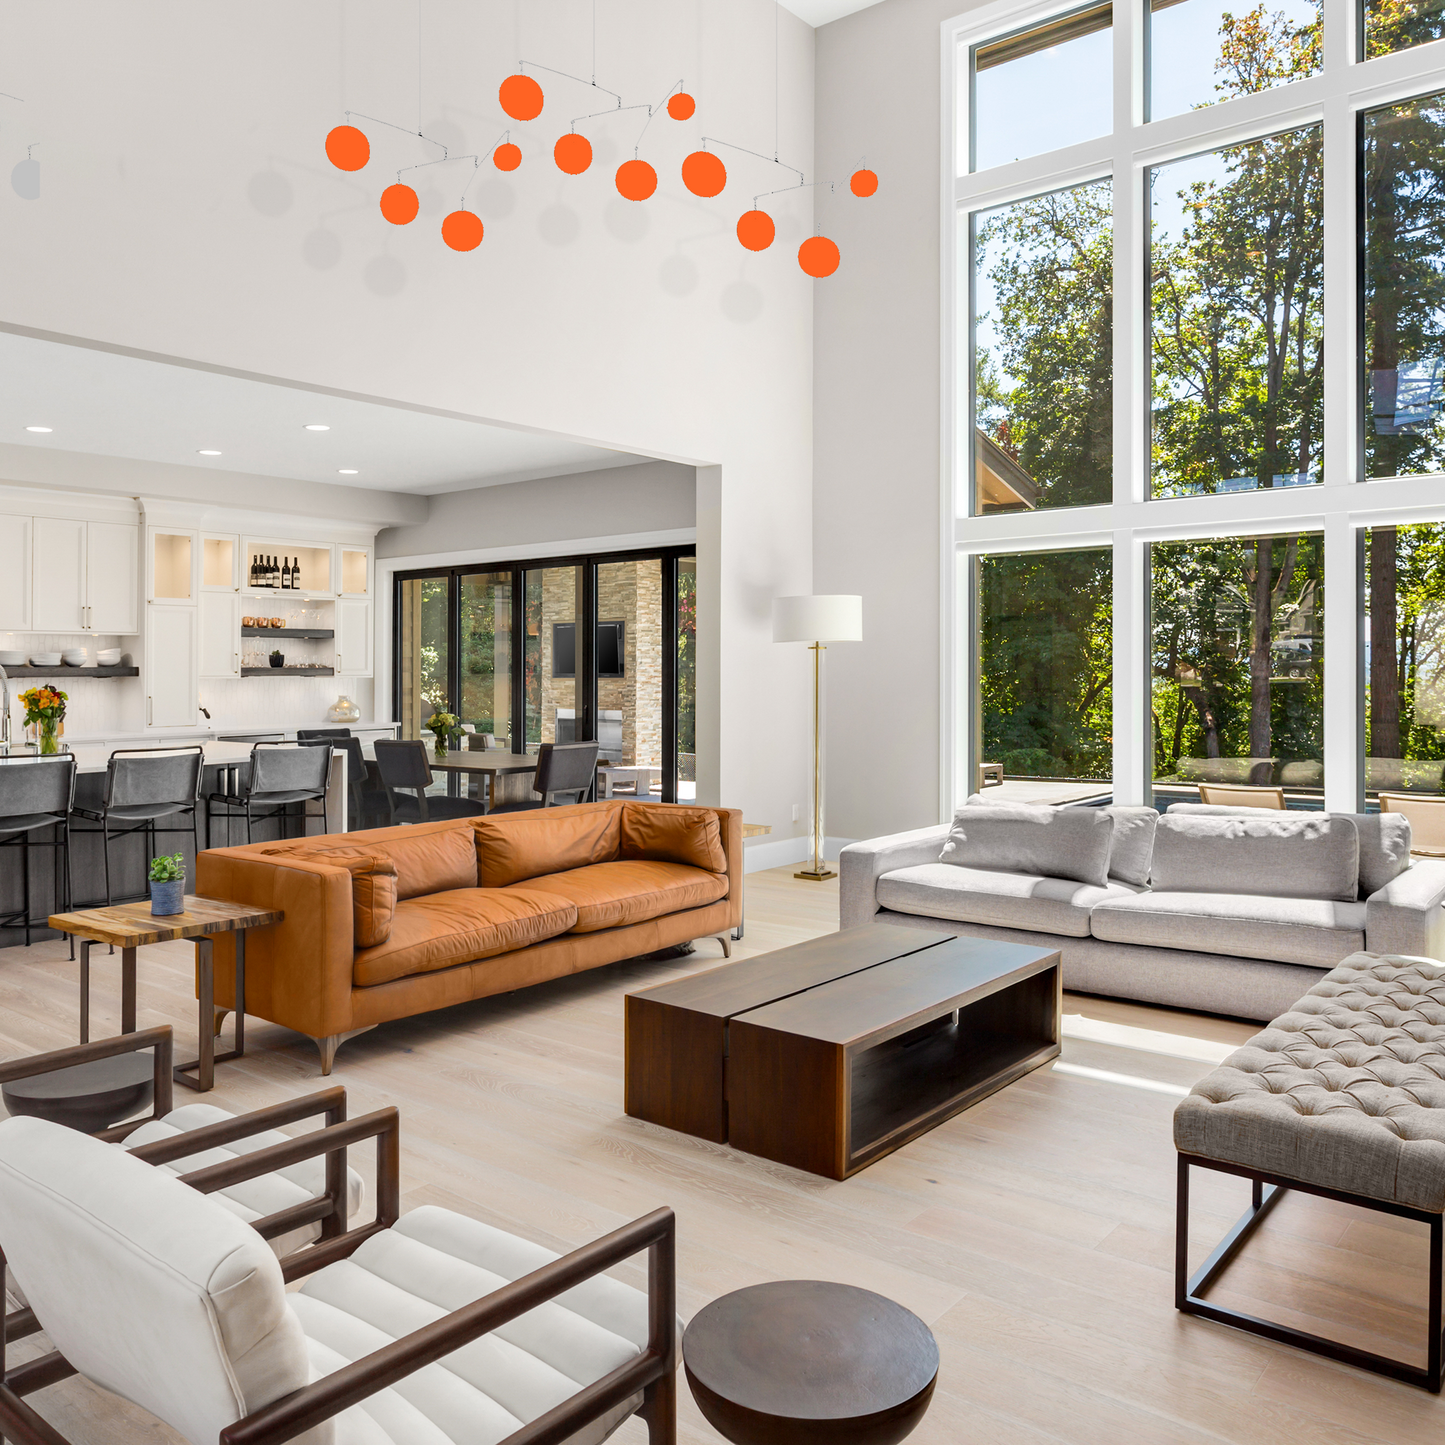 Contemporary living room with tall windows and ceiling feature orange Jetsetter XL hanging kinetic art mobiles by AtomicMobiles.com